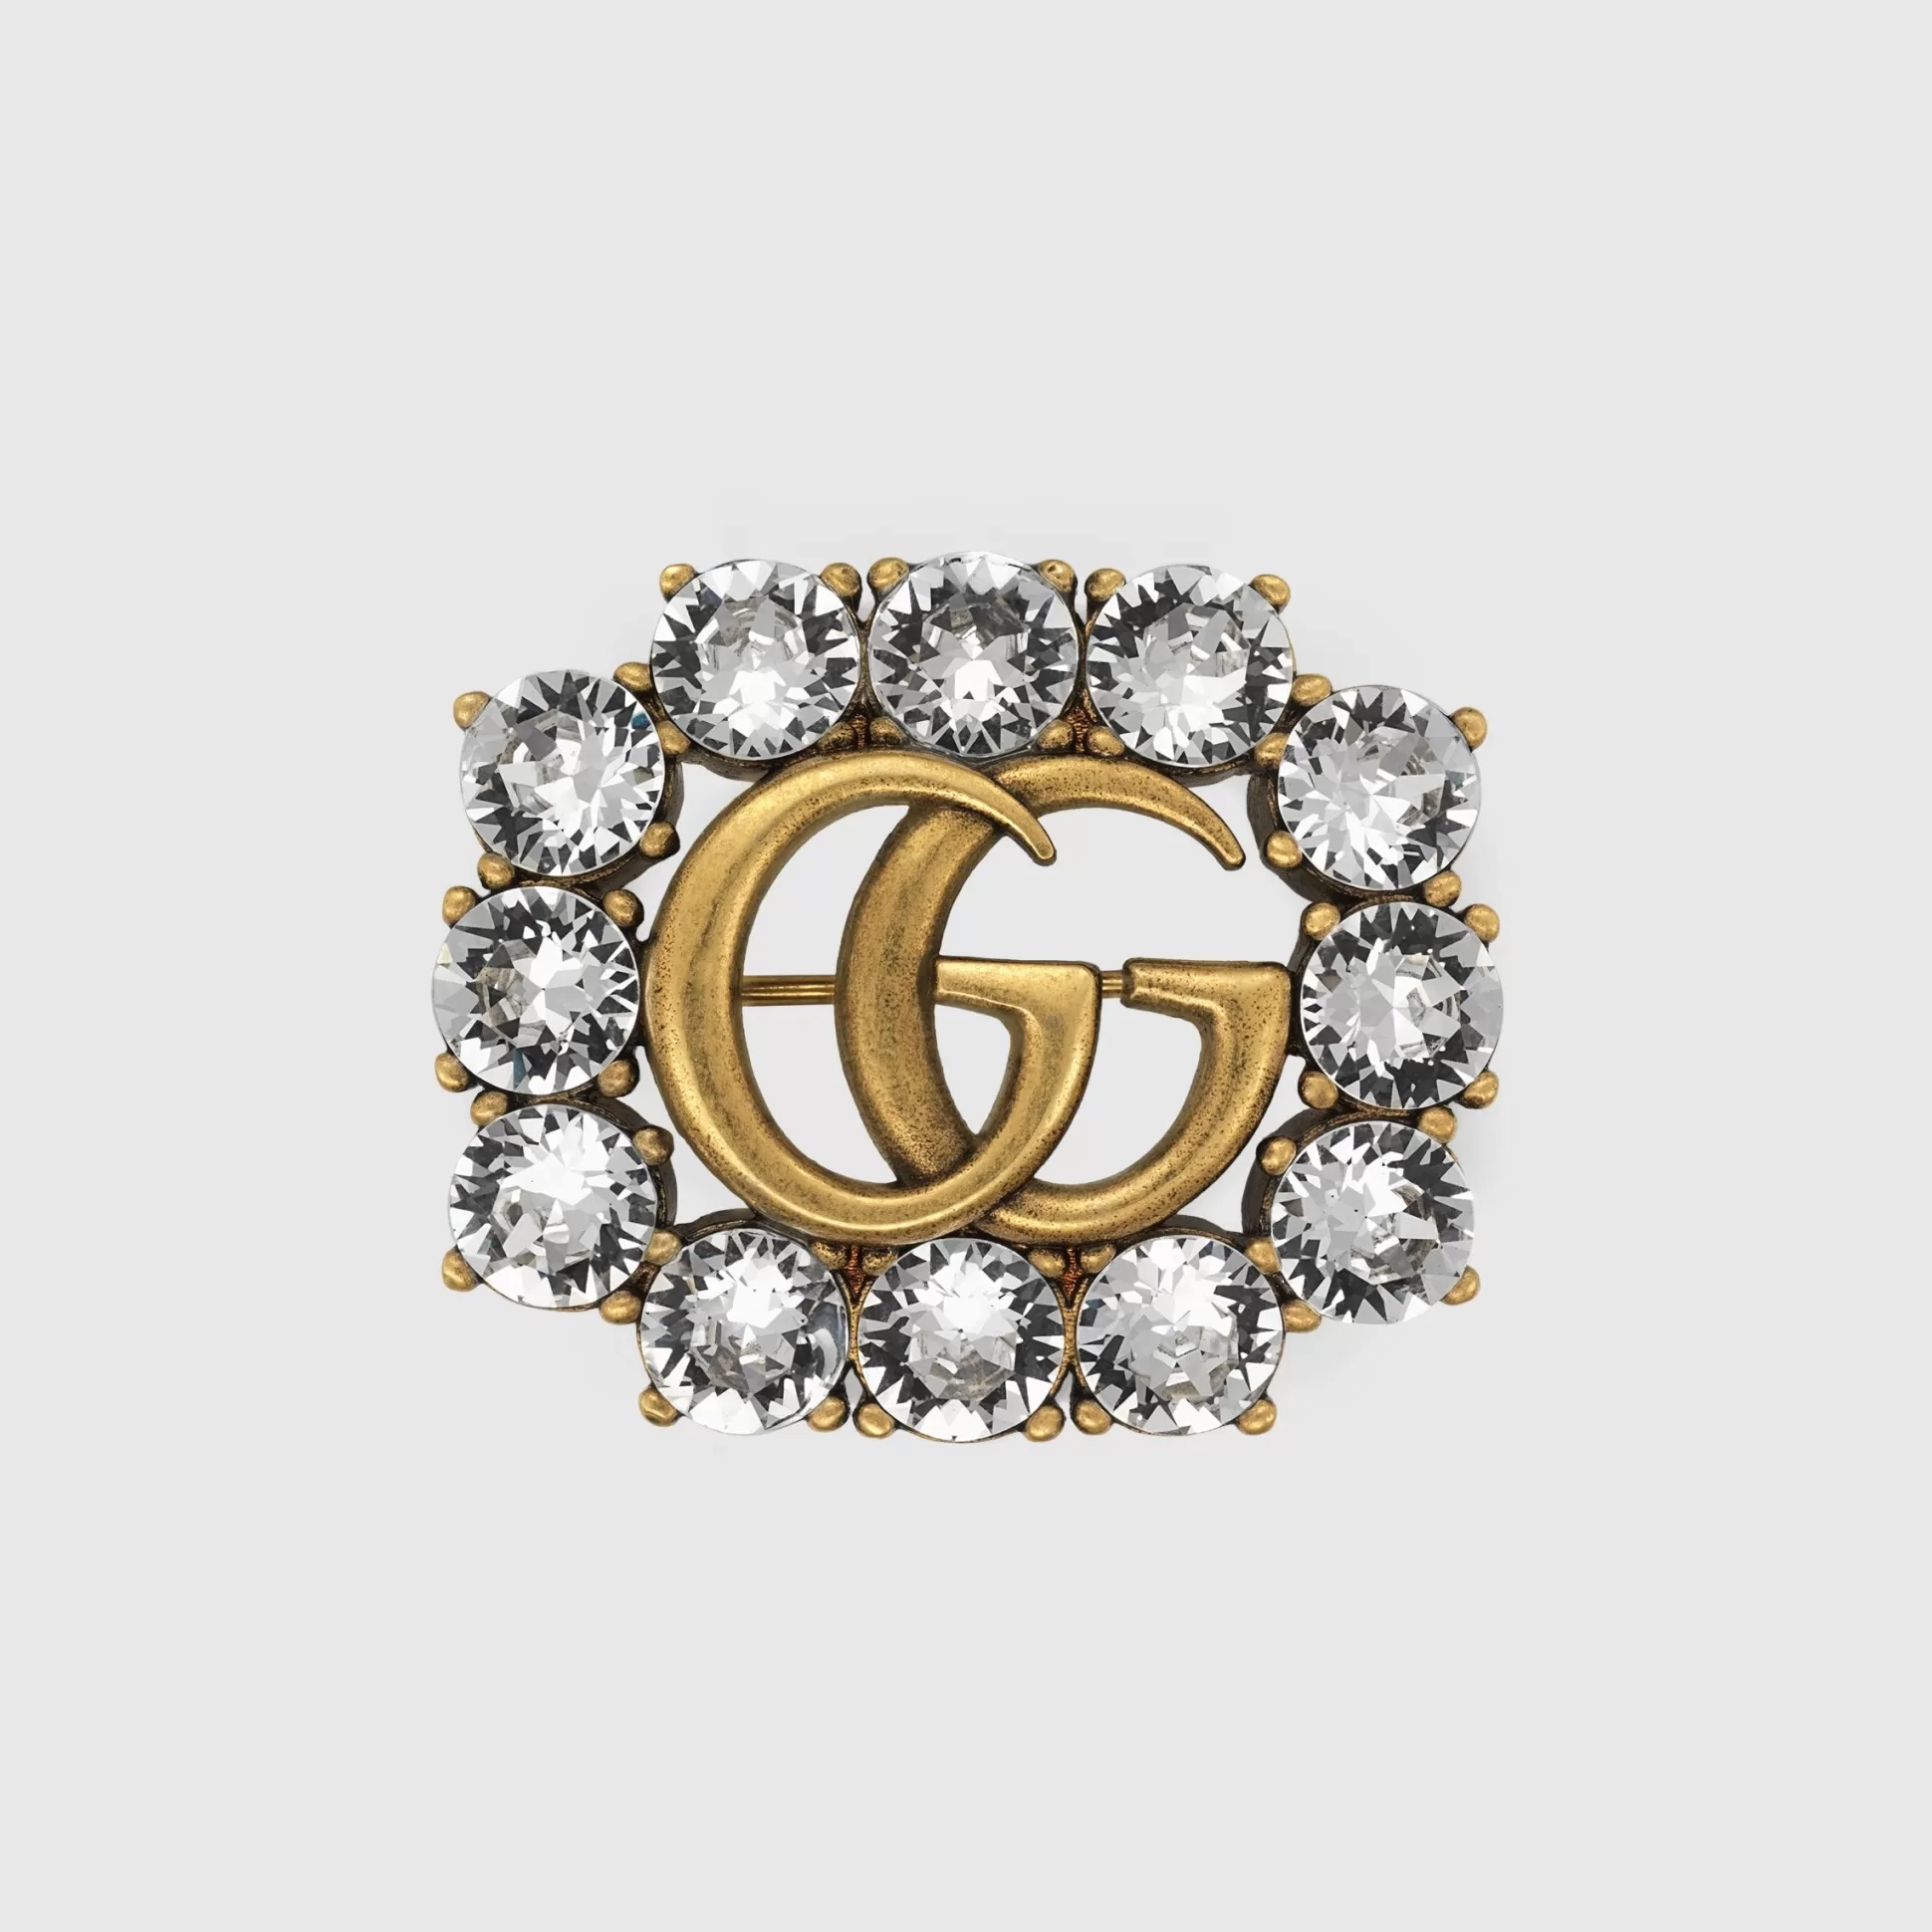 GUCCI Metal Double G Brooch With Crystals- Brooches & Pins